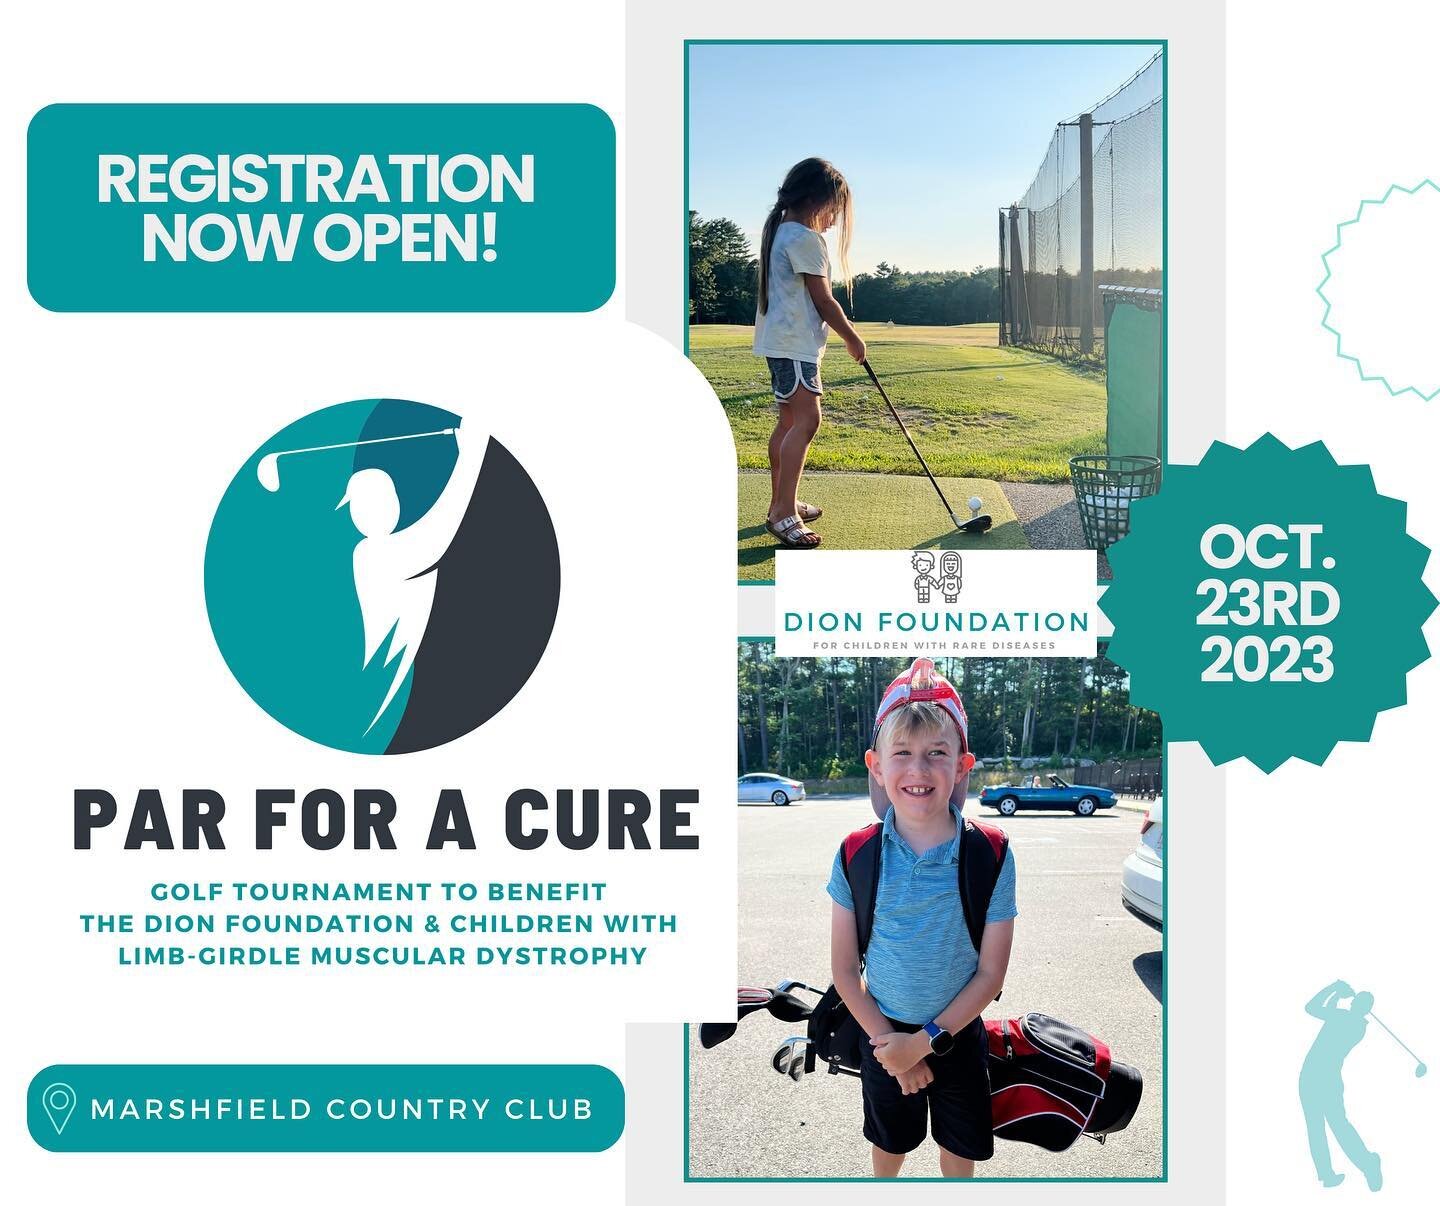 1ST ANNUAL GOLF TOURNAMENT REGISTRATION IS NOW LIVE!

The Dion Foundation is so excited to announce our first annual Golf Classic! This day will be dedicated to raising funds for research and spreading awareness for Limb Girdle Muscular Dystrophy. We